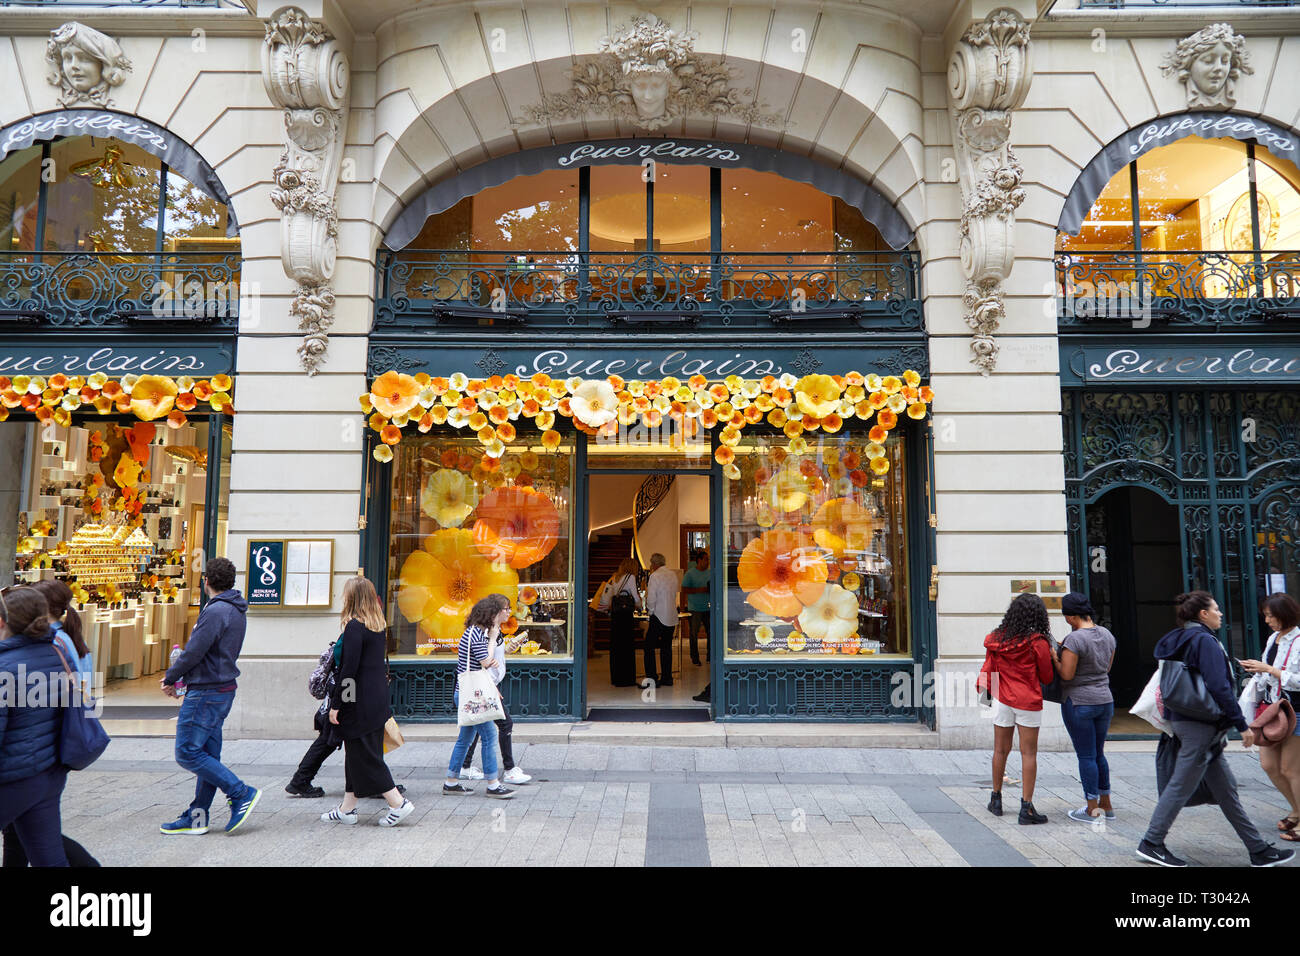 PARIS, FRANCE - JULY 22, 2017: Guerlain cosmetics luxury store in Paris, people passing, France. Stock Photo